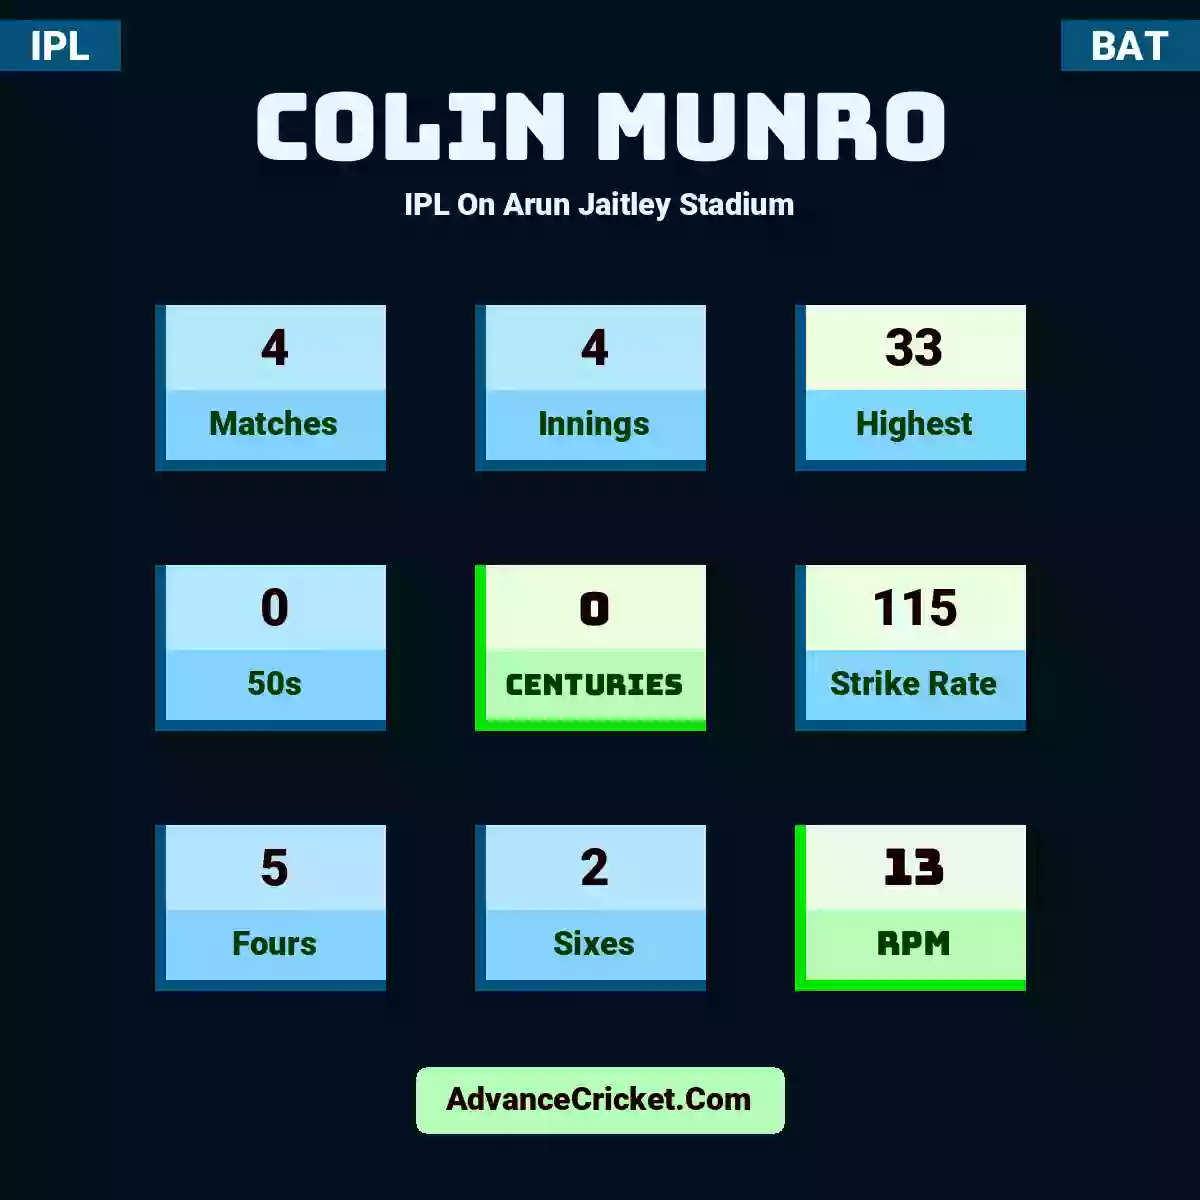 Colin Munro IPL  On Arun Jaitley Stadium, Colin Munro played 4 matches, scored 33 runs as highest, 0 half-centuries, and 0 centuries, with a strike rate of 115. C.Munro hit 5 fours and 2 sixes, with an RPM of 13.